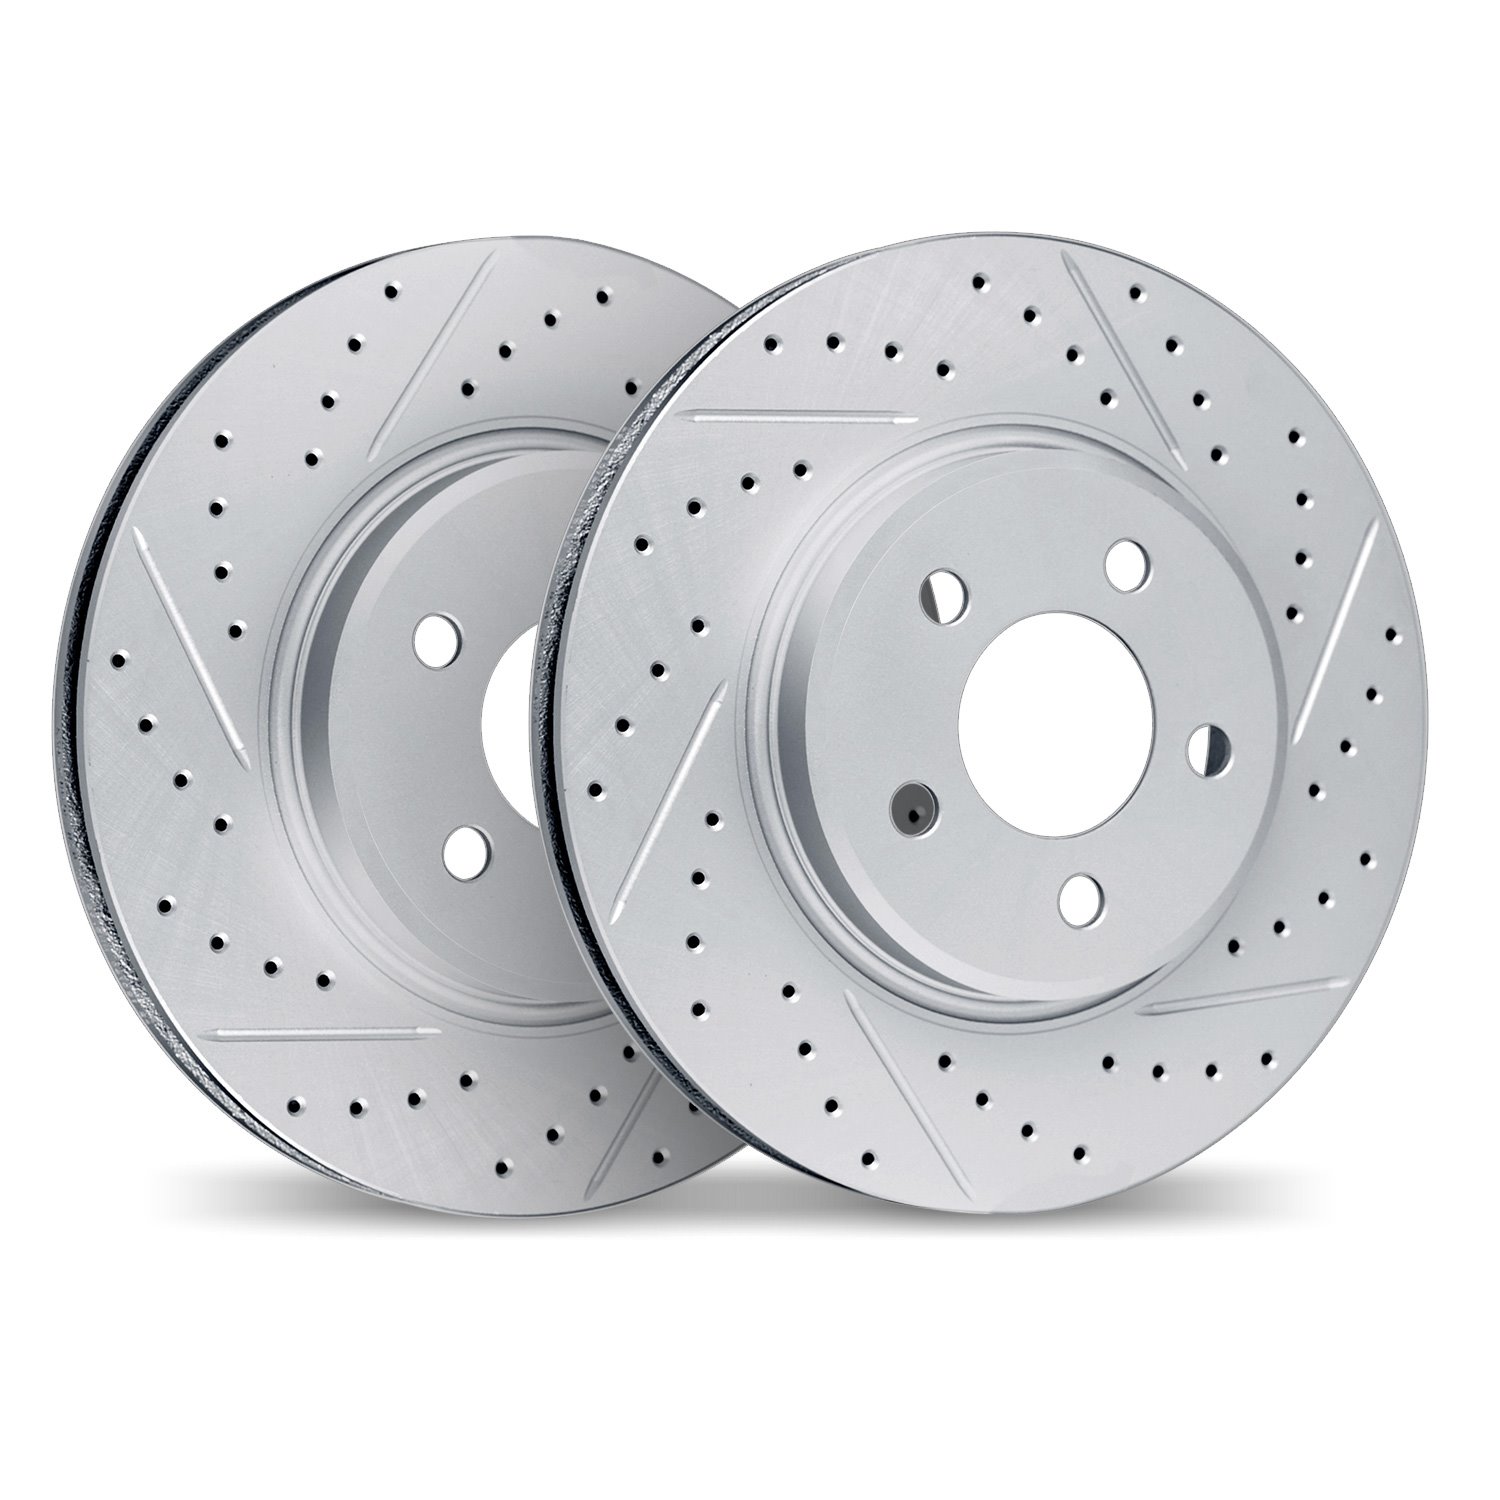 2002-52018 Geoperformance Drilled/Slotted Brake Rotors, 2005-2006 GM, Position: Rear